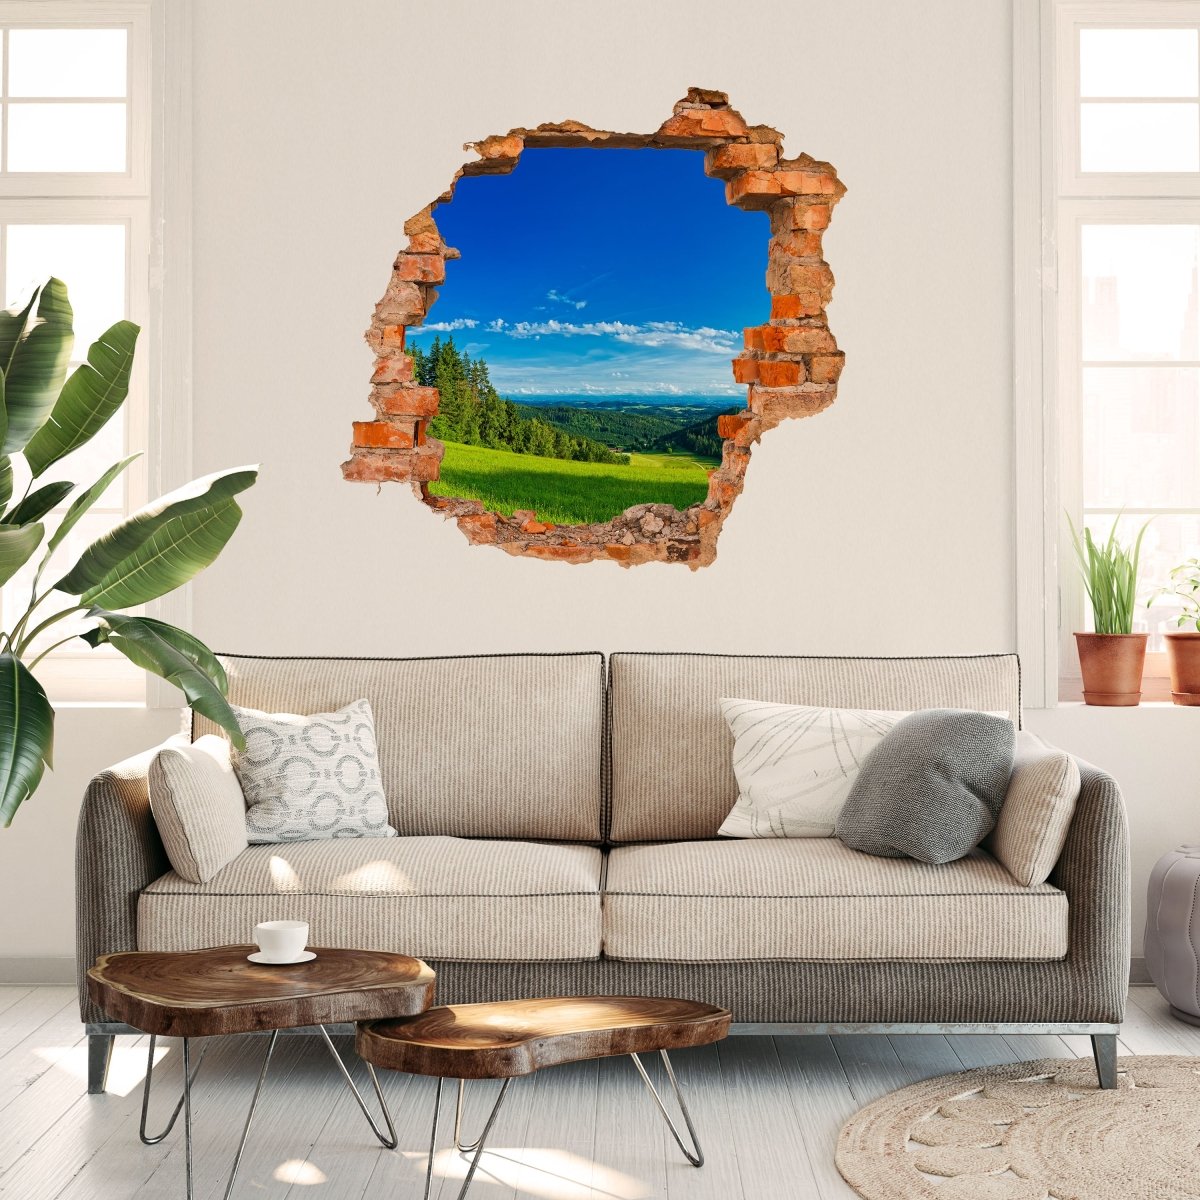 3D wall sticker wide view from the mountain, meadows, landscape - wall decal M1171